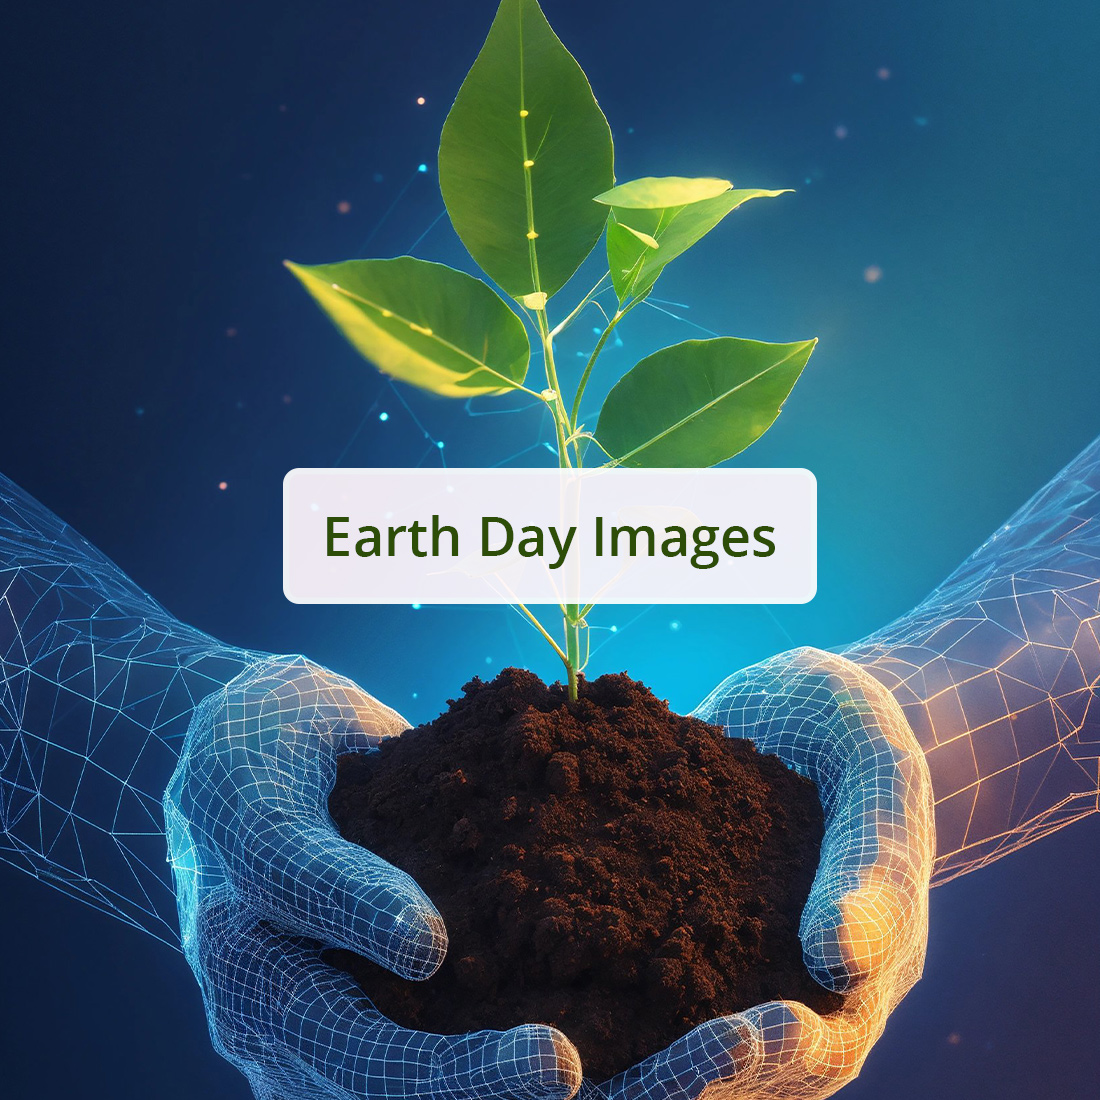 Earth day images, World environment day cover image.